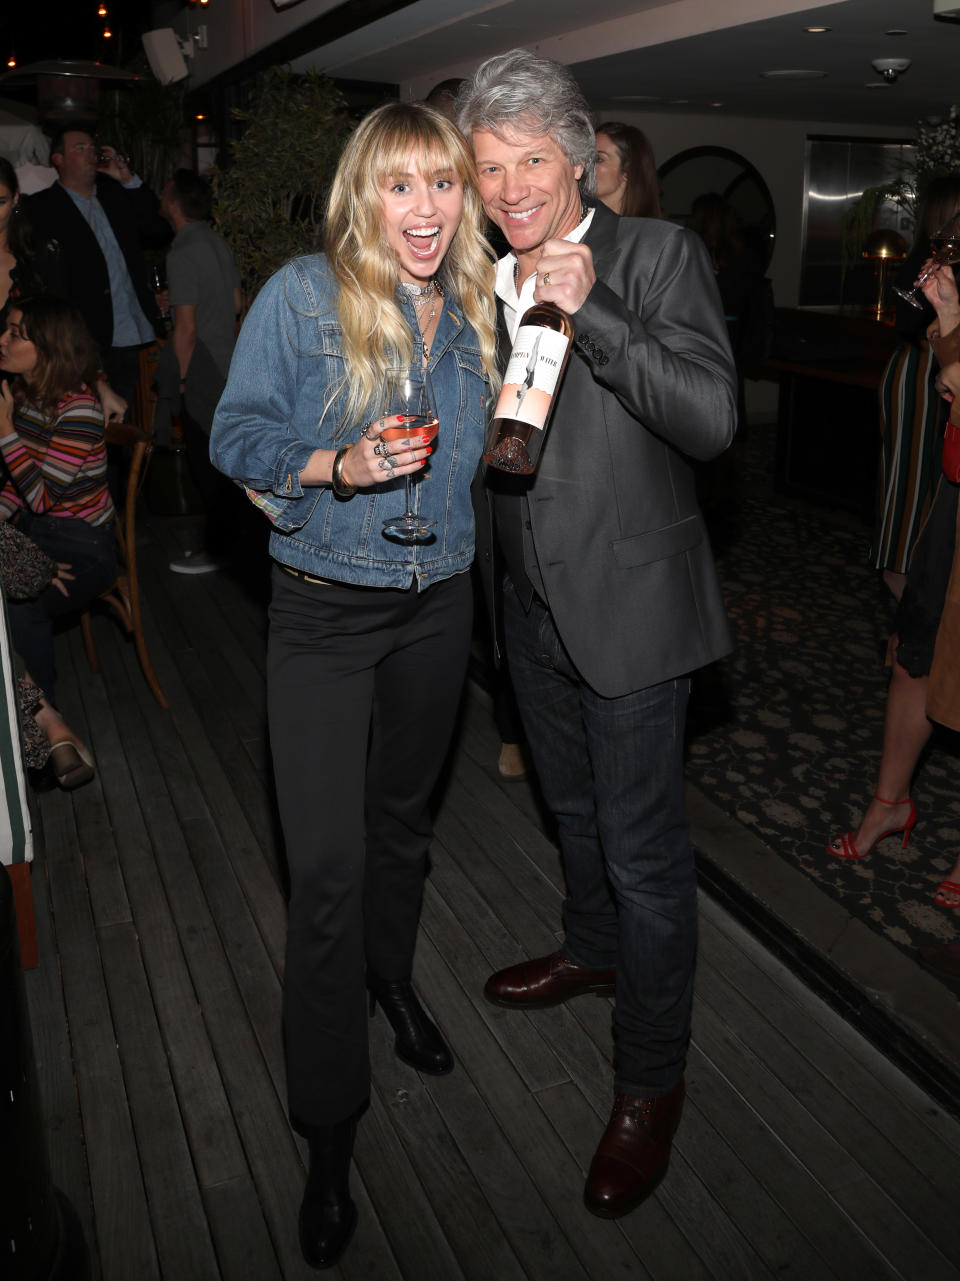 WEST HOLLYWOOD, CALIFORNIA - MARCH 28:  Miley Cyrus and Jon Bon Jovi attend the Hampton Water Rosé Celebrates LA Launch at Harriet's Rooftop on March 28, 2019 in West Hollywood, California. (Photo by Jerritt Clark/Getty Images for Hampton Water)